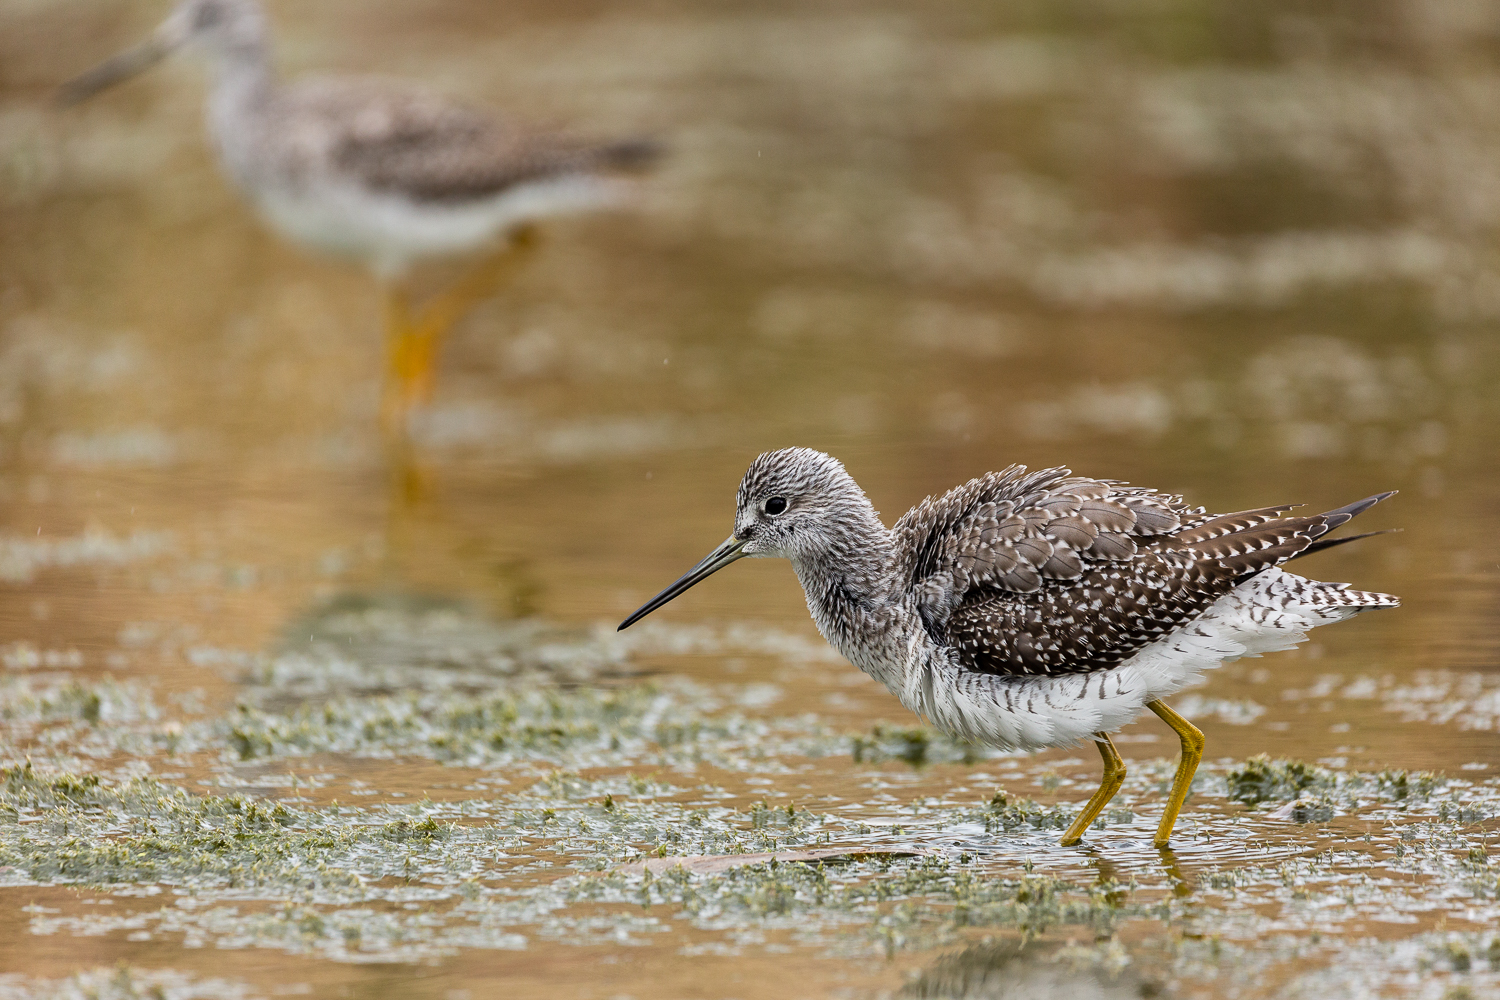 Migrating shorebirds such as Greater Yellowlegs stop over in the inlet of Sherman Creek. Photo: John Mack/Audubon Photography Awards